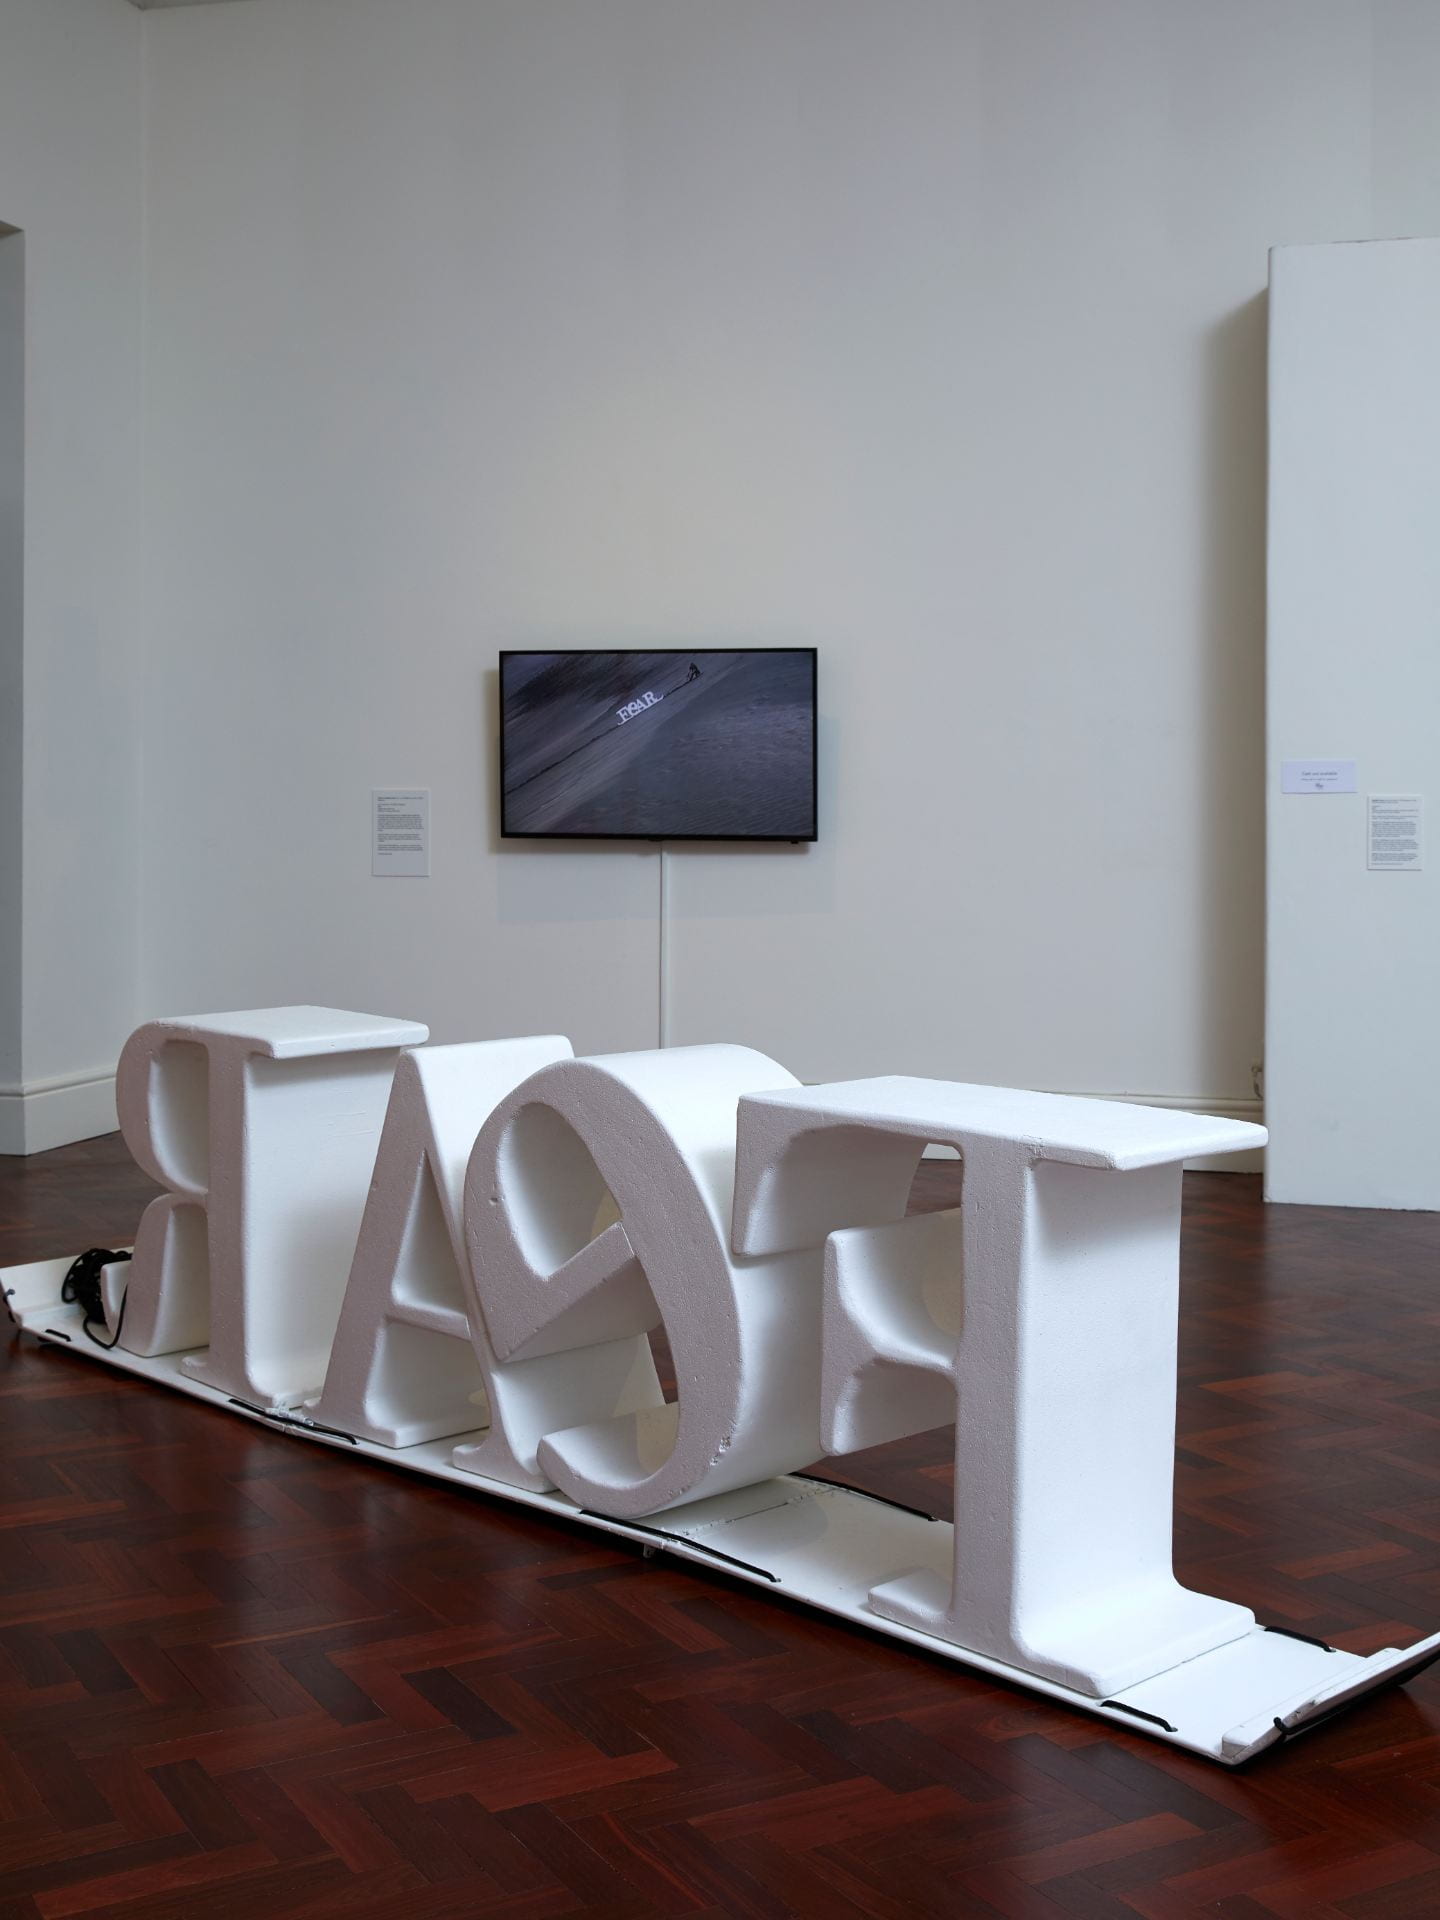 A 3D sculpture of giant white letters spelling out 'FEAR', with a TV playing an accompanying film visible on the wall in the background.